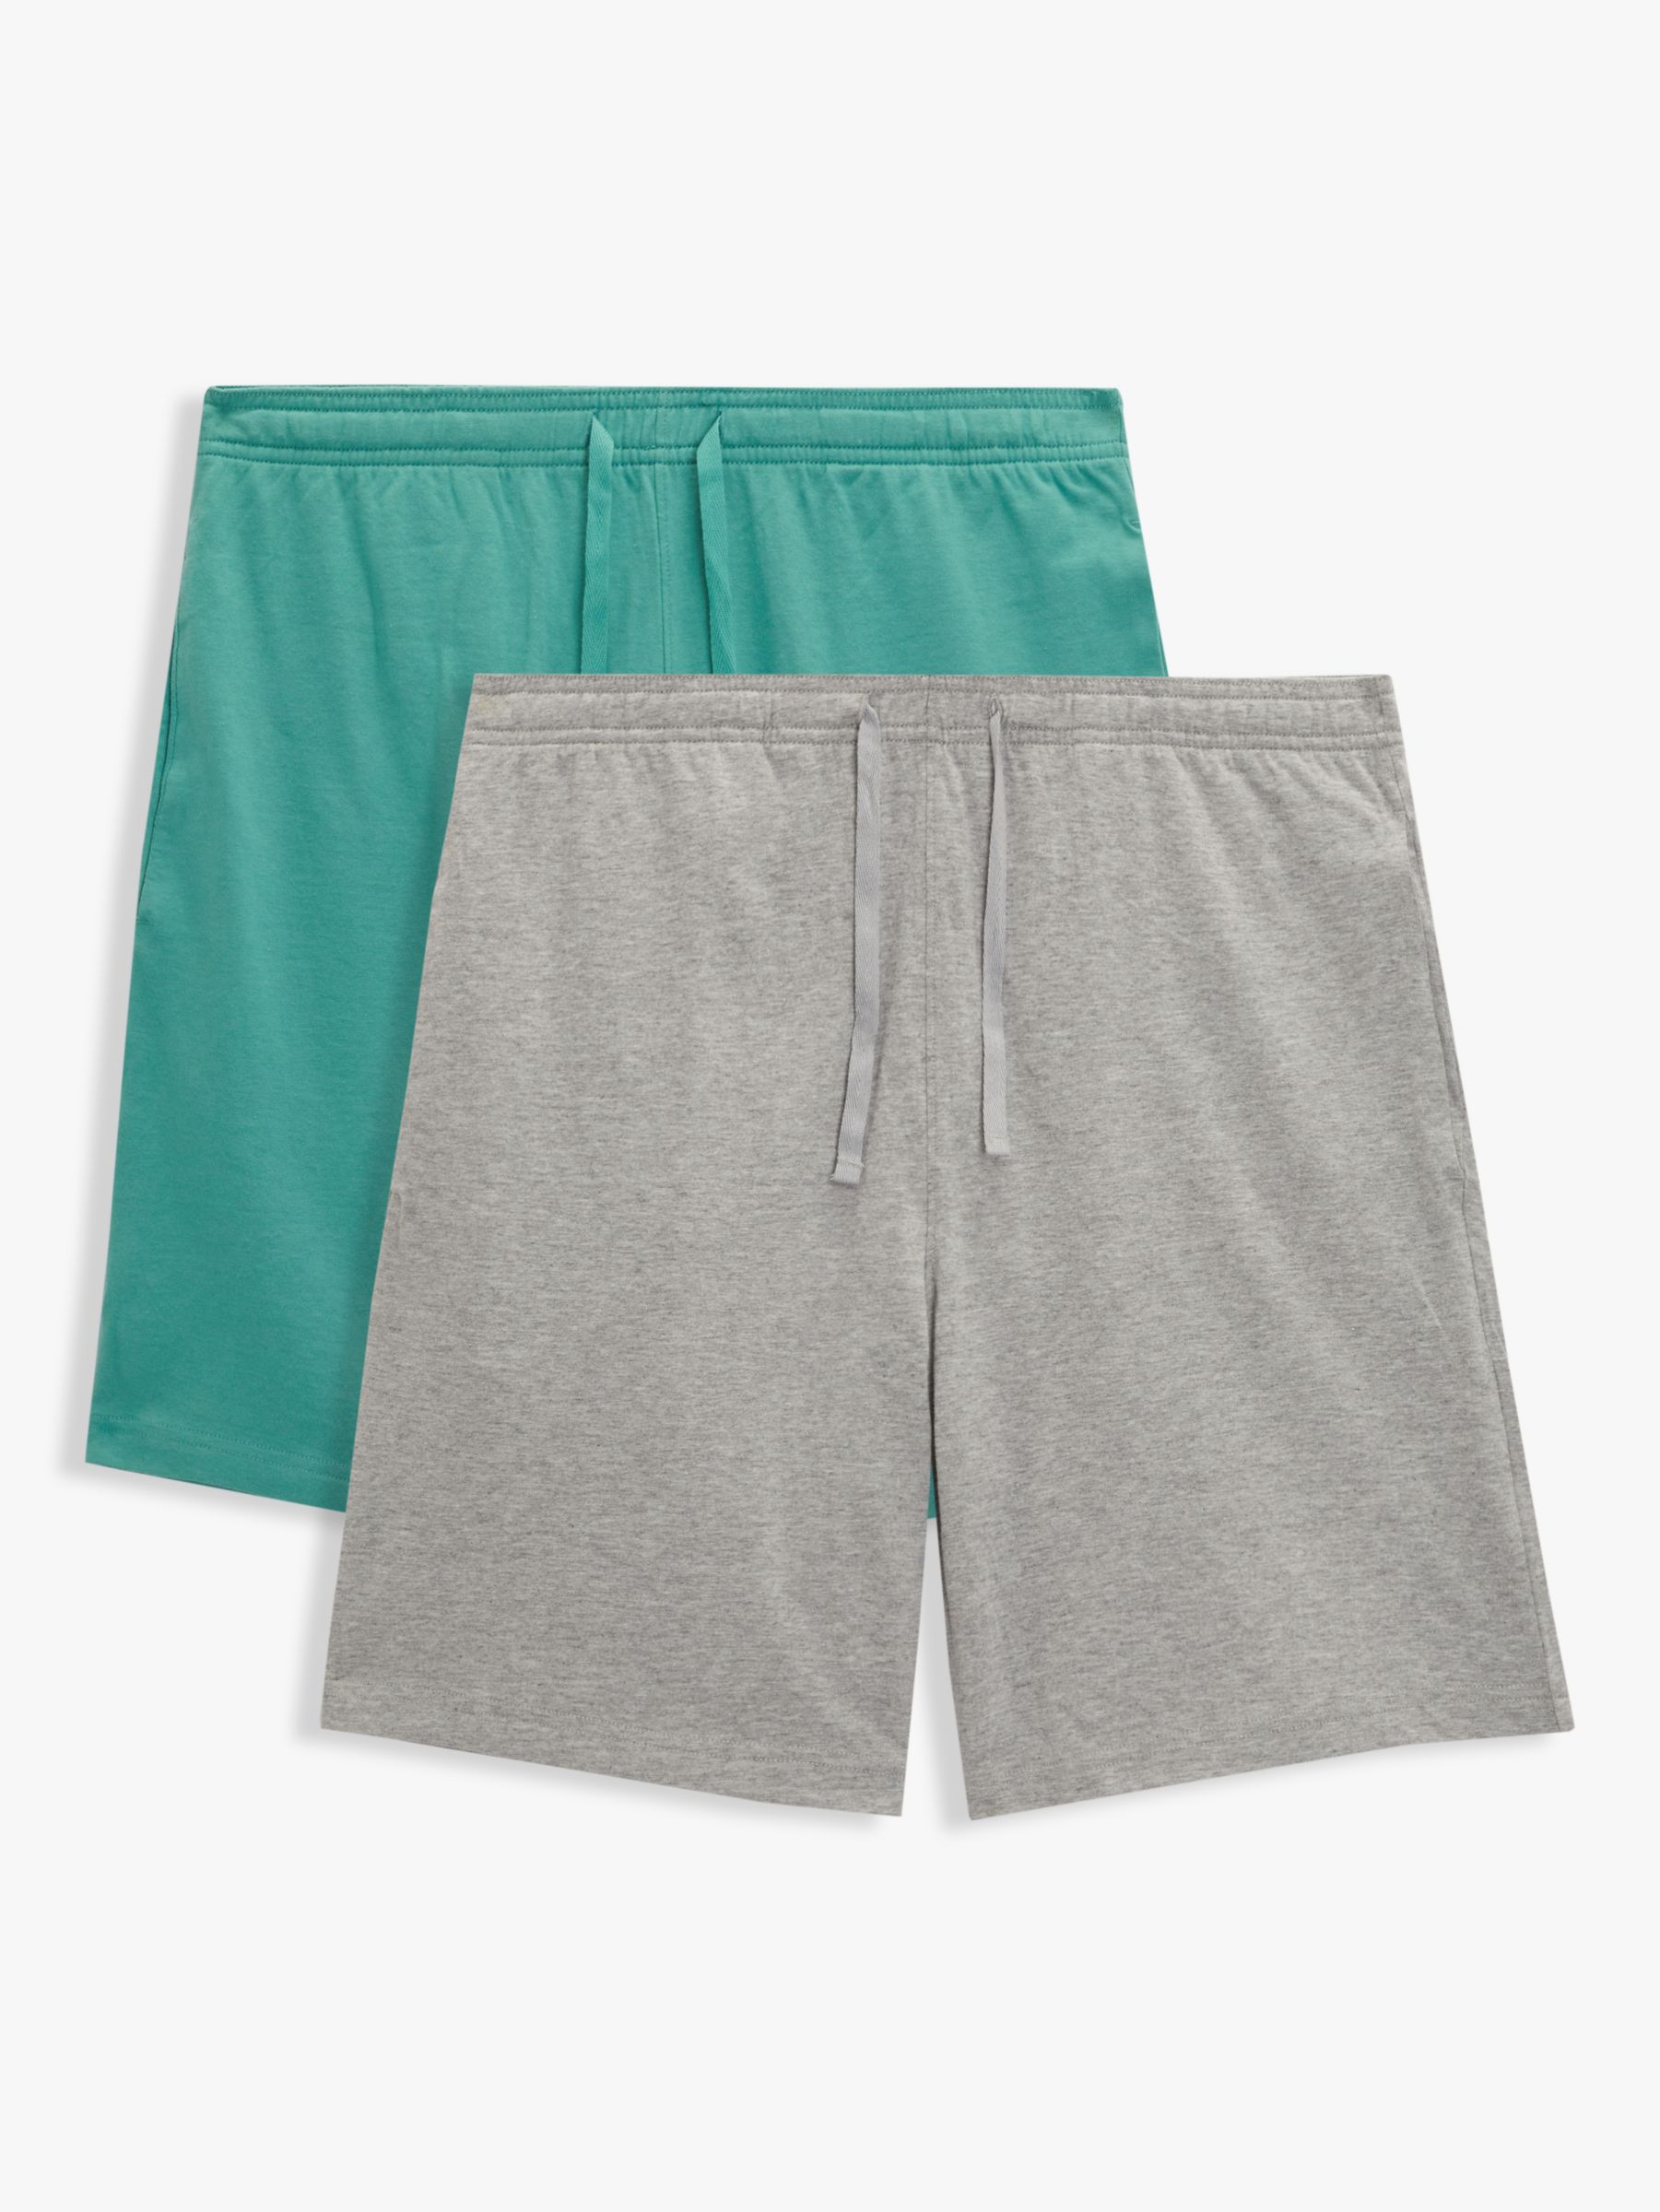 John Lewis ANYDAY Cotton Jersey Lounge Shorts, Pack of 2, Grey/Green